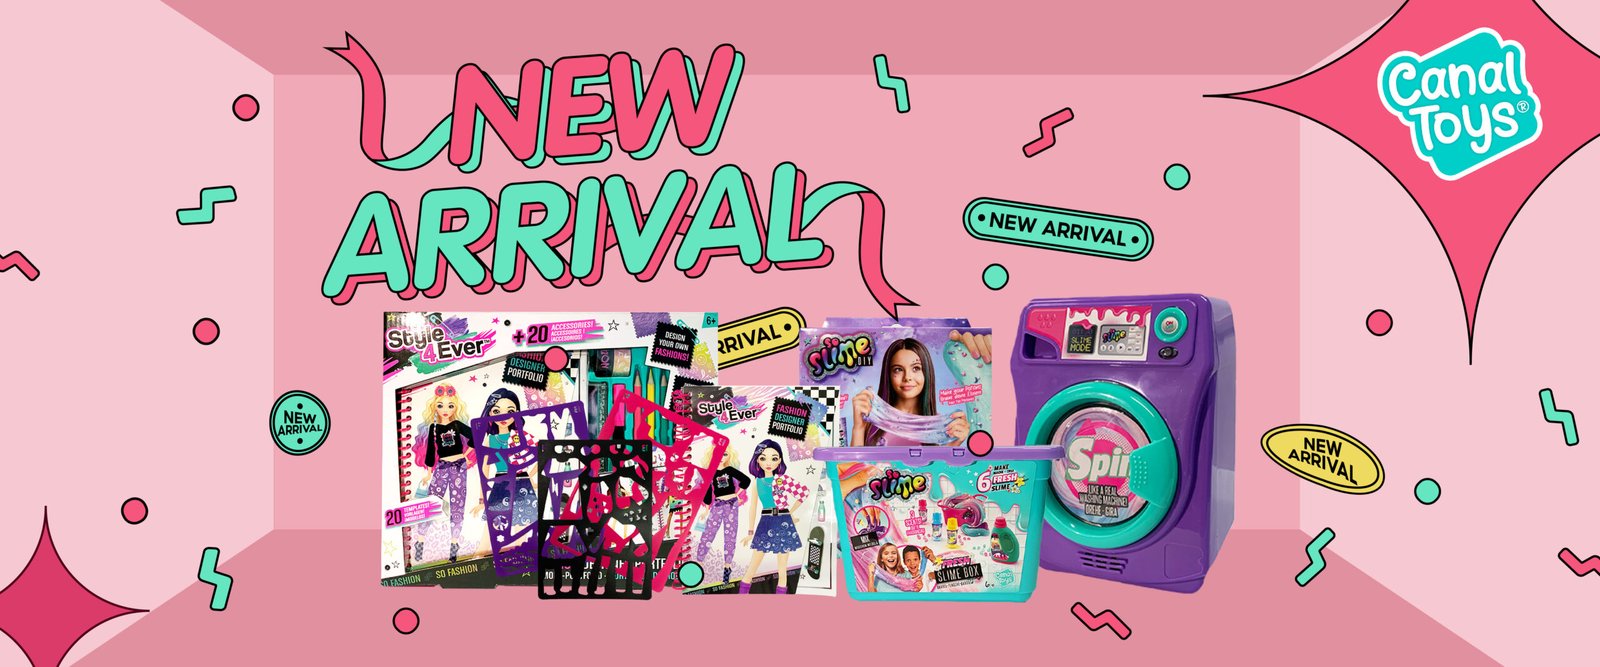 NEW ARRIVAL_CANAL_BANNER